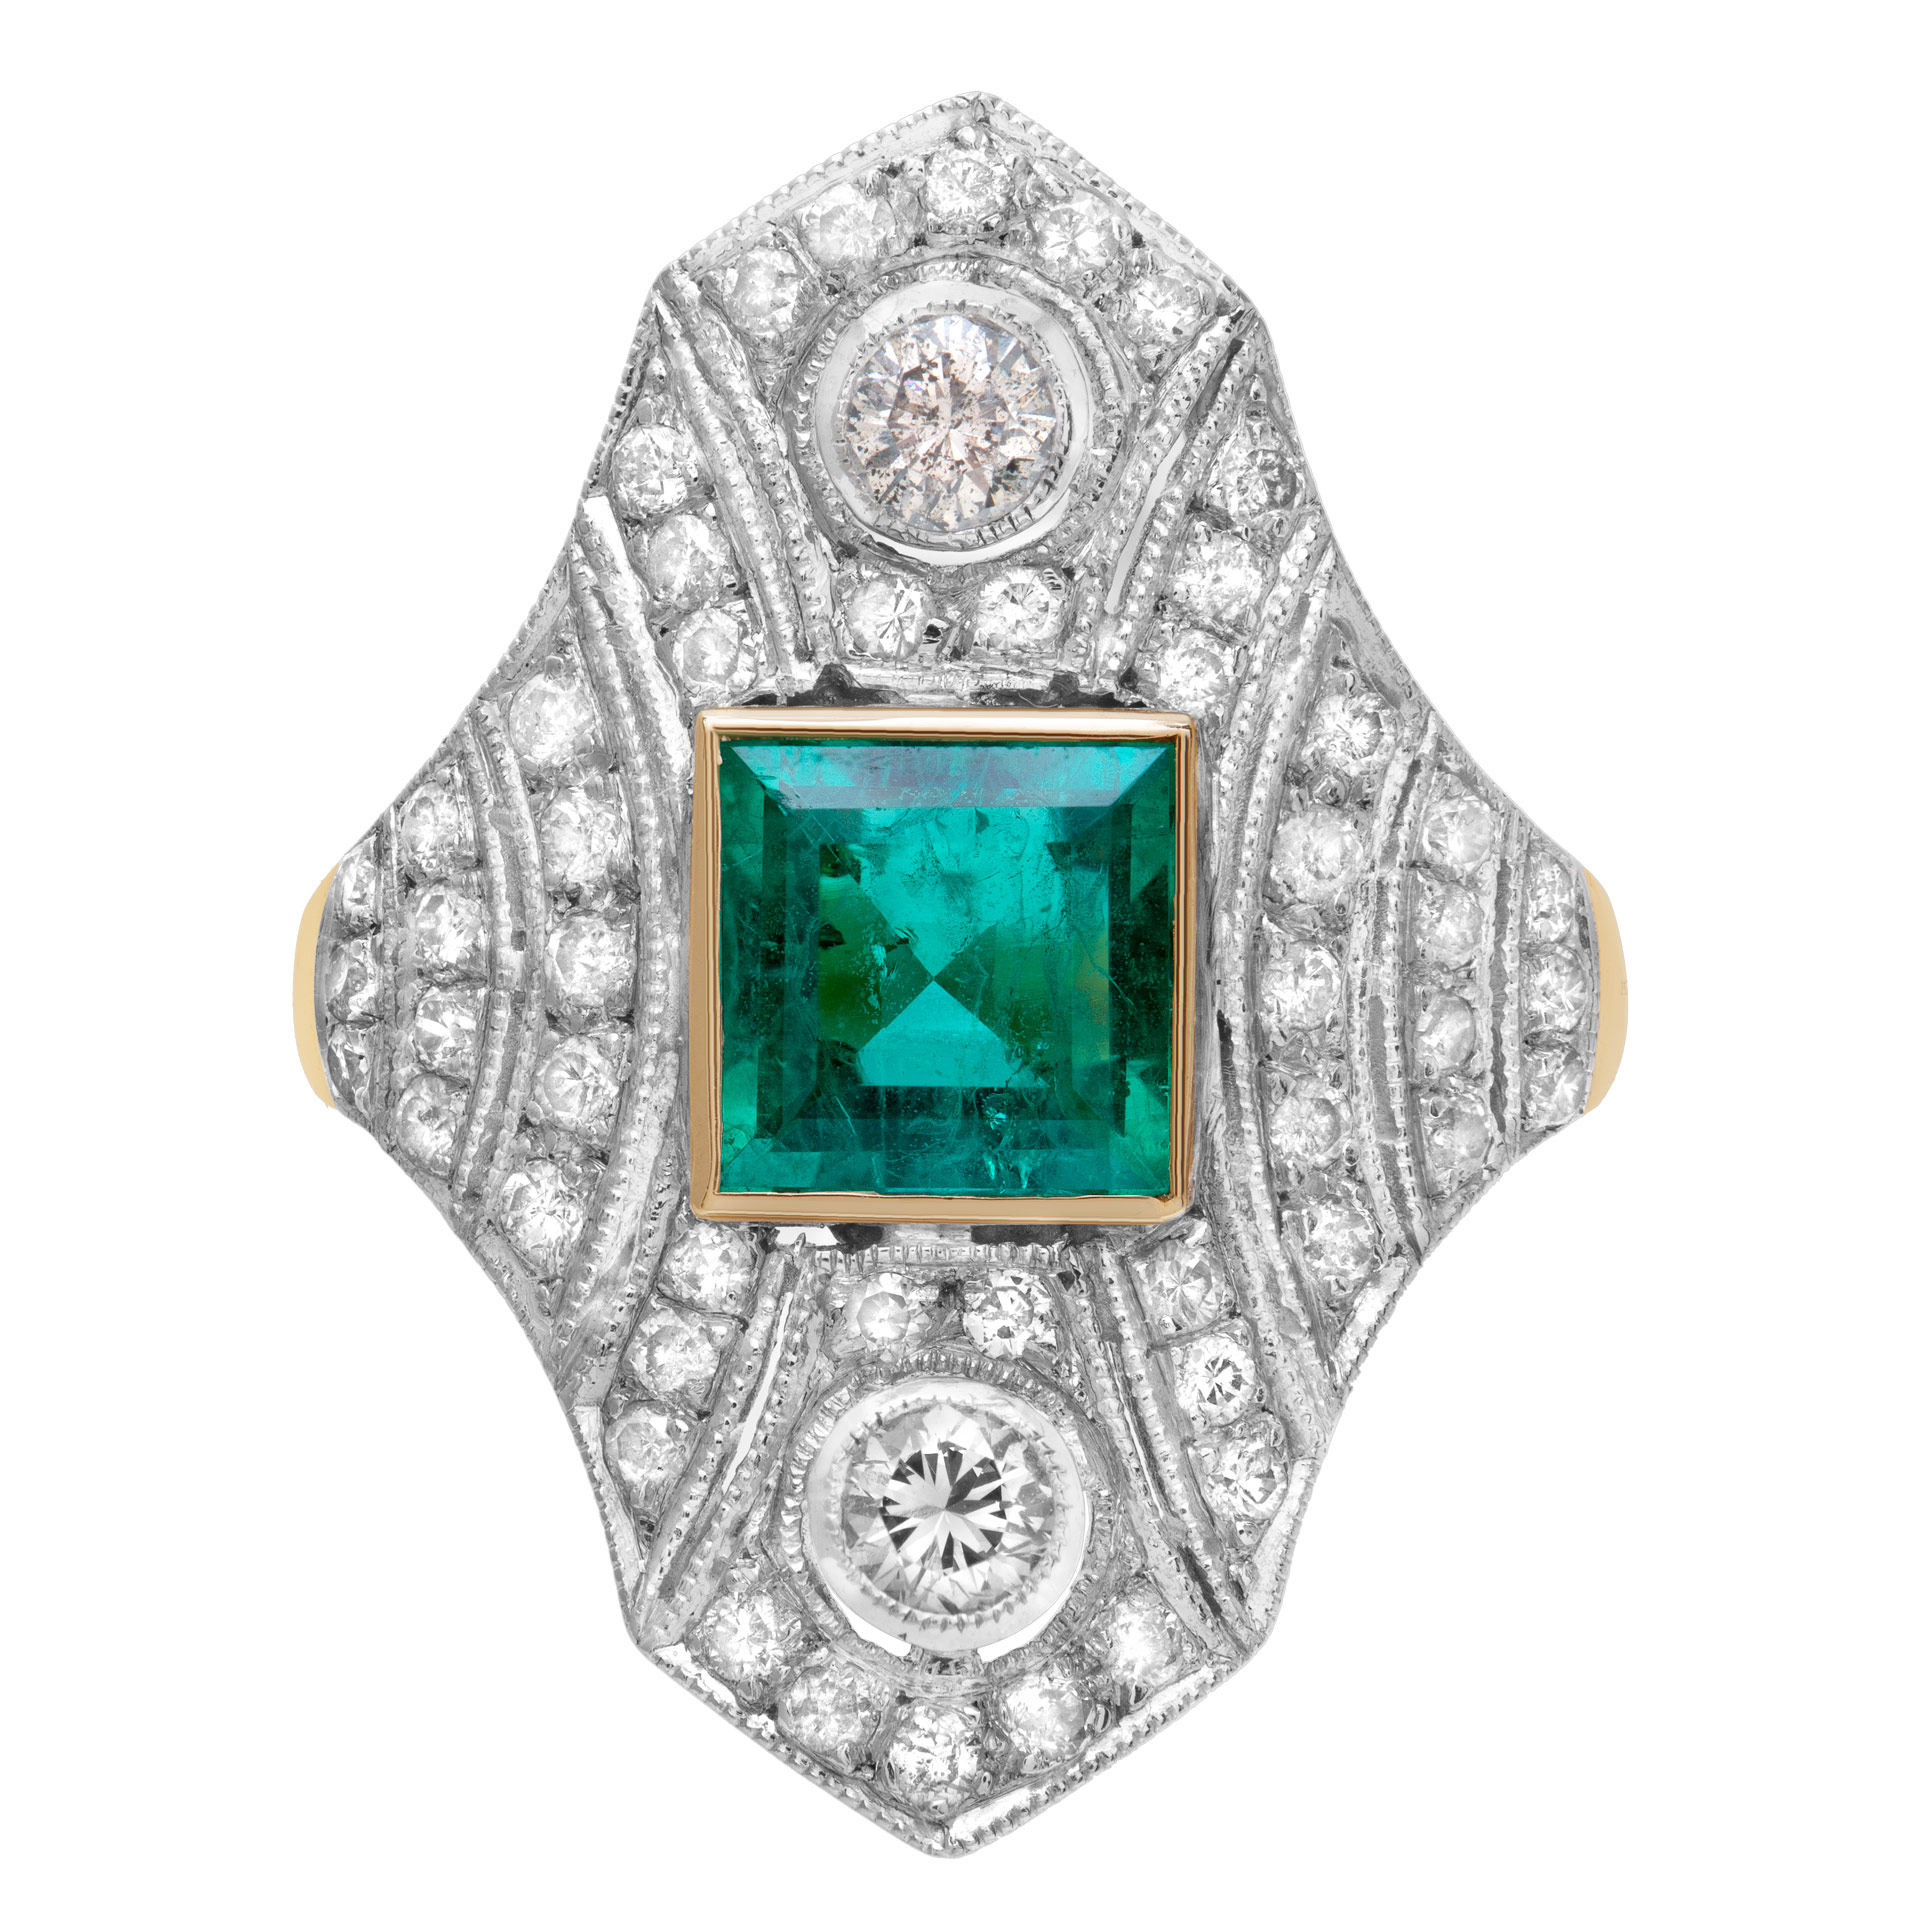 Emerald and diamond ring in 18k yellow and white gold